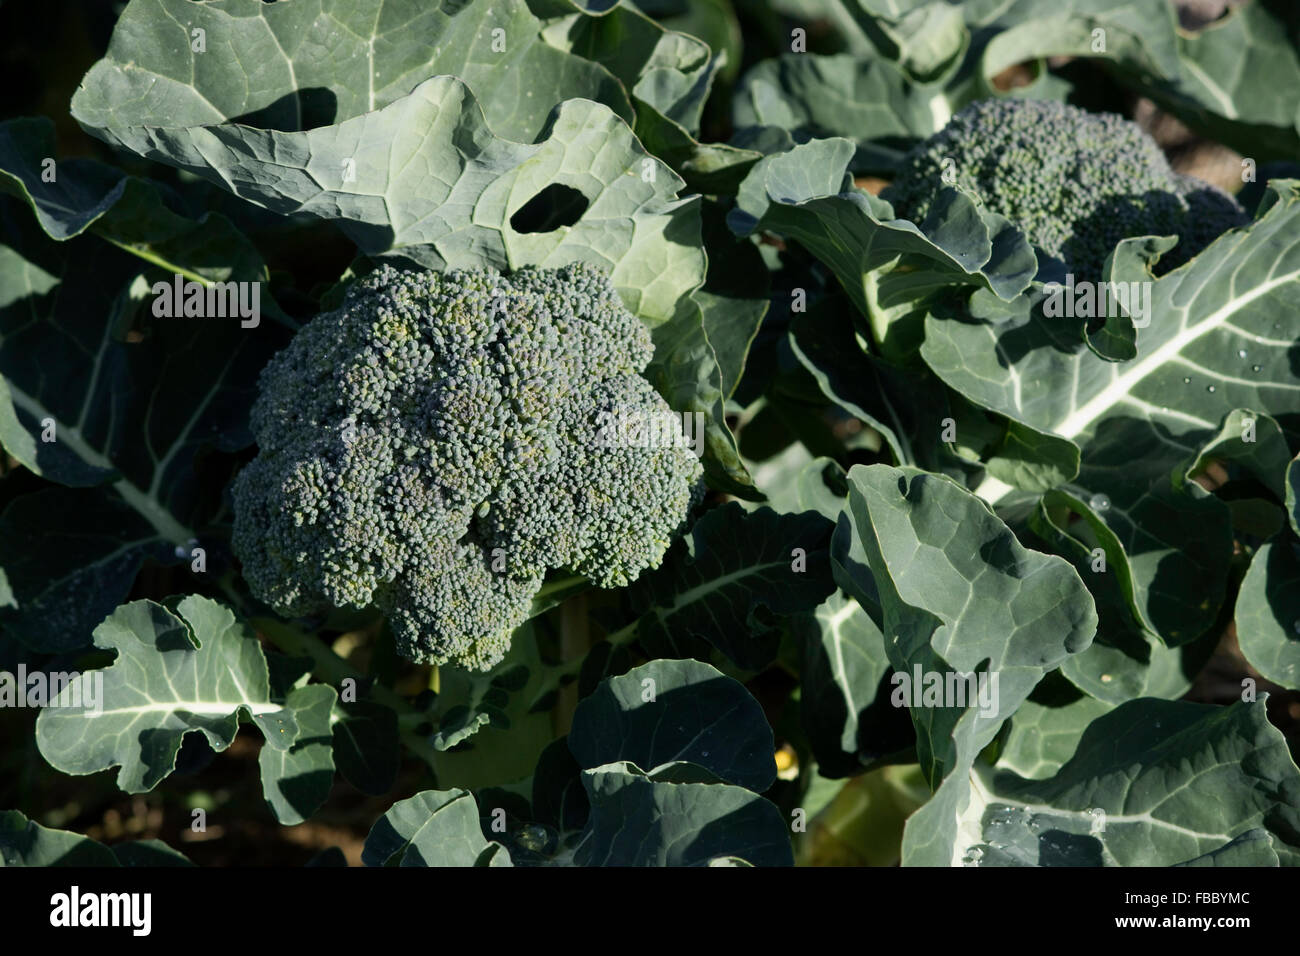 Head and leaves of a broccoli plant growing naturally in chemical-free / no pesticides soil. Lemnos island, Greece Stock Photo